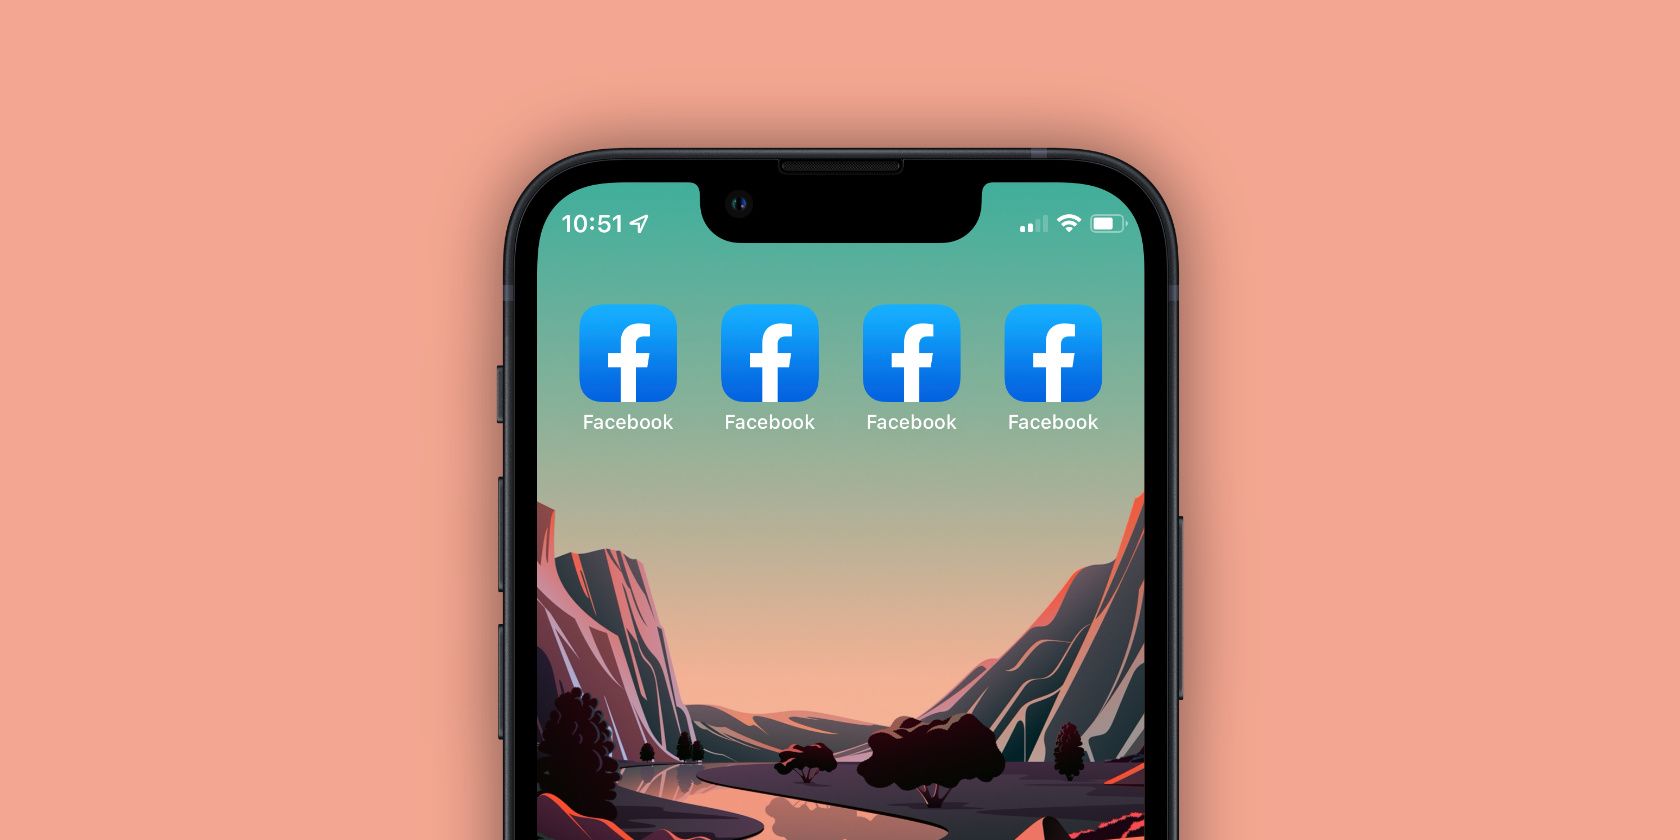 Duplicate Facebook icons on an iPhone Home Screen featured